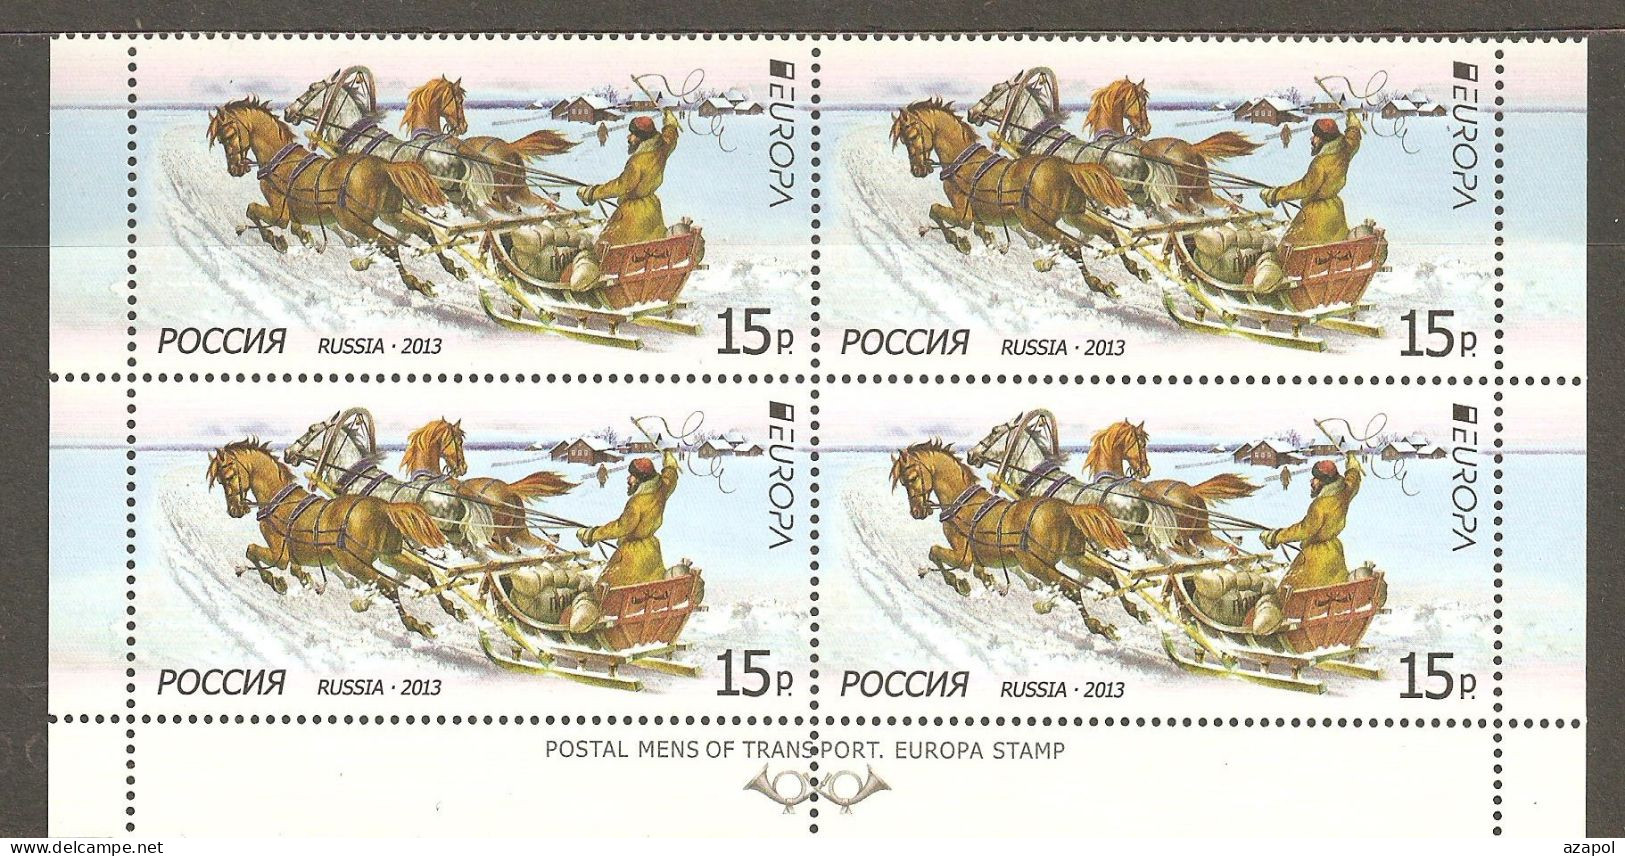 Russia: Single Mint Stamp In Block Of 4, EUROPA - Postal Vehicles, 2013, Mi#1925, MNH - Unused Stamps